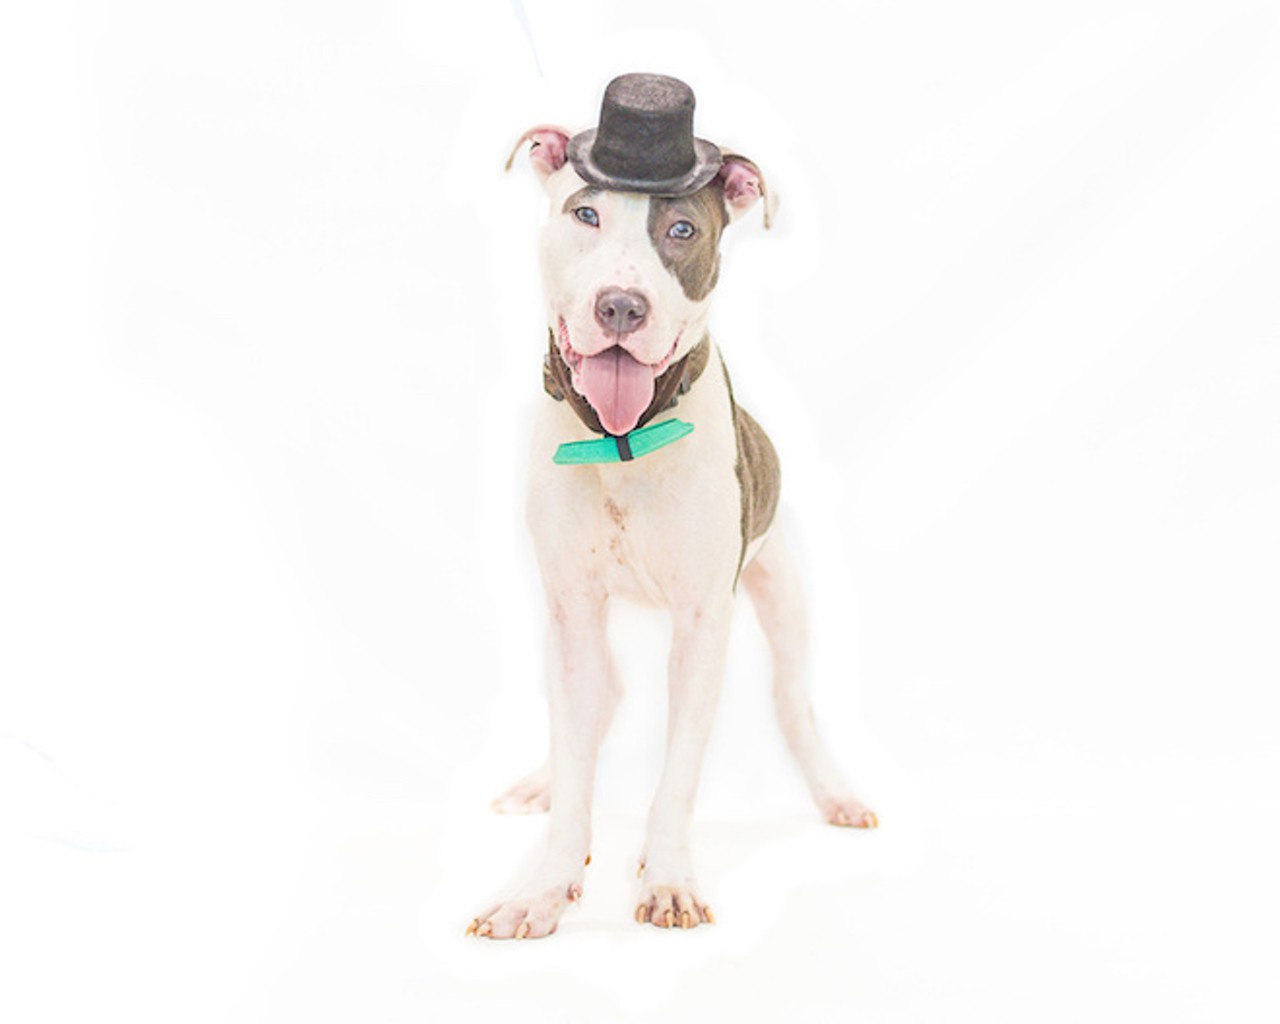 30 super-cute, super-adoptable dogs waiting for you to take them home